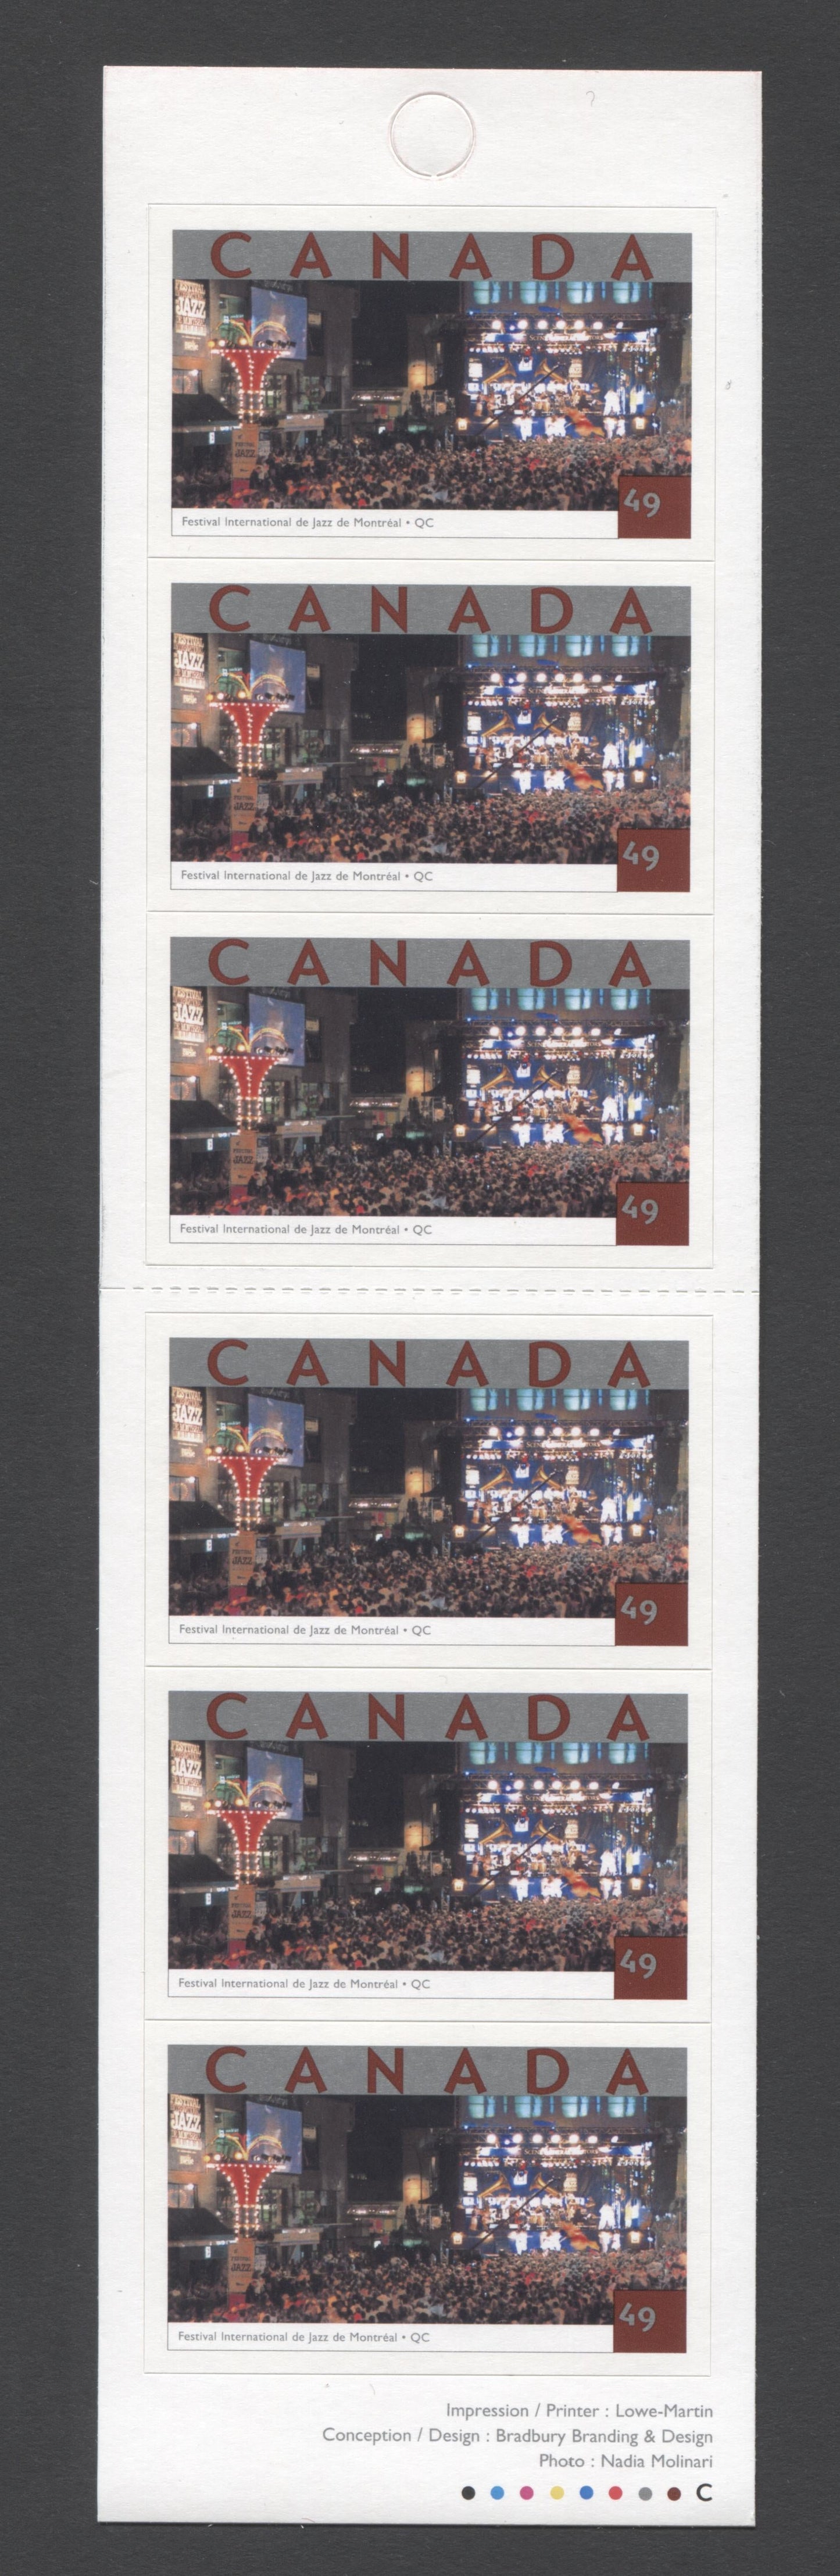 Canada #BK293 2004 Tourist Attractions Issue, Complete $2.94 Booklet, Tullis Russell Coatings Paper, Dead Paper, 4 mm GT-4 Tagging